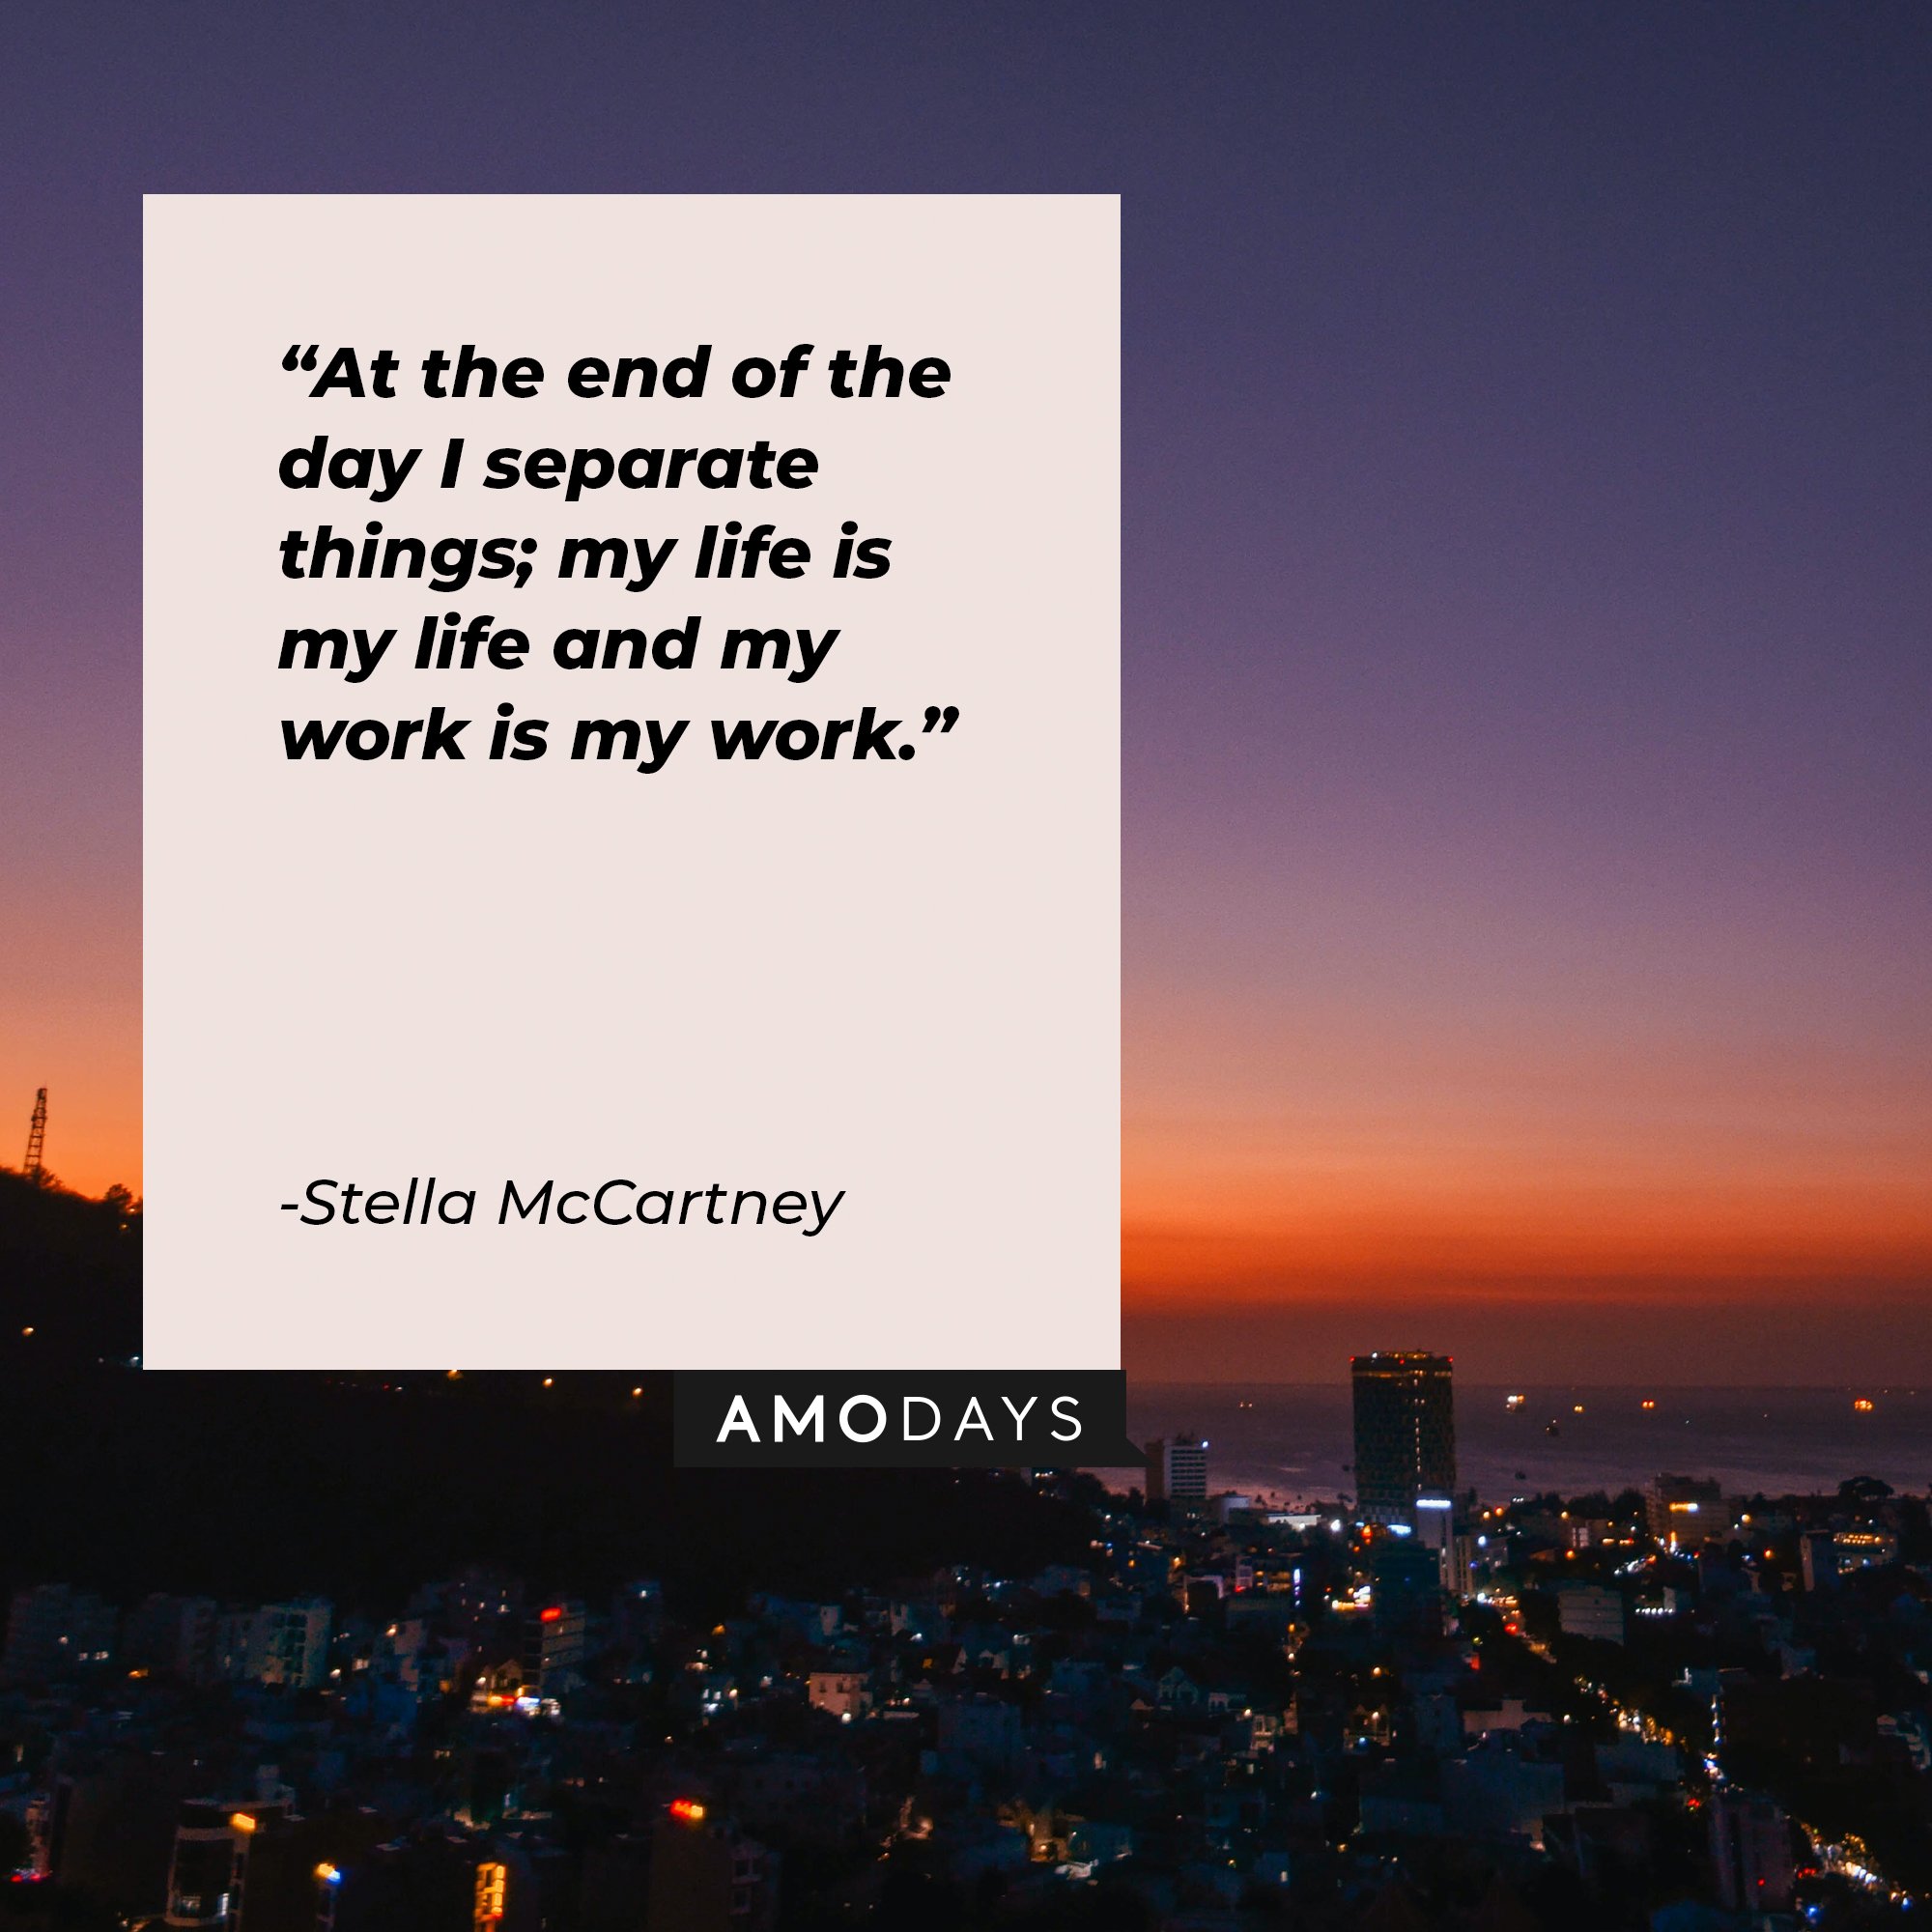 Stella McCartney’s quote: “At the end of the day, I separate things; my life is my life, and my work is my work.” | Image: AmoDays   